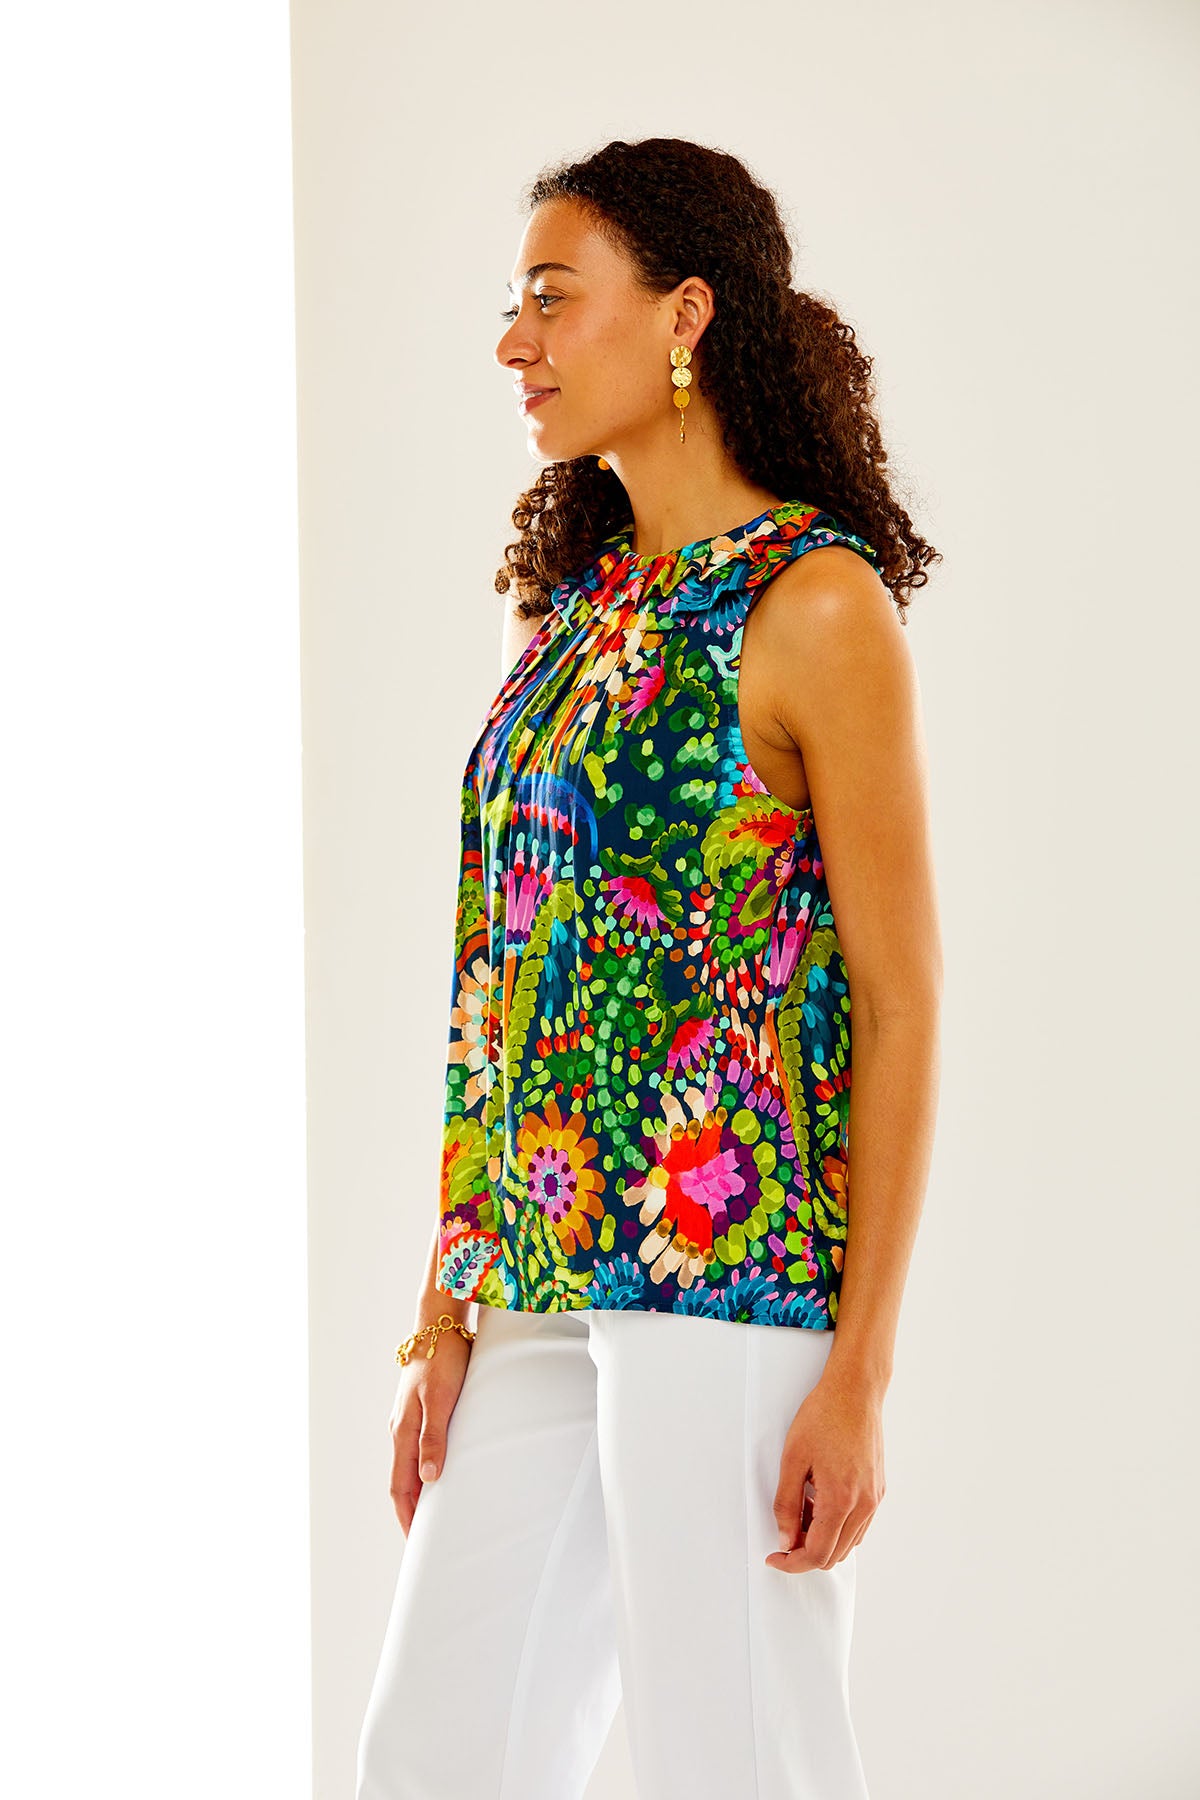 Woman in abstract print blouse